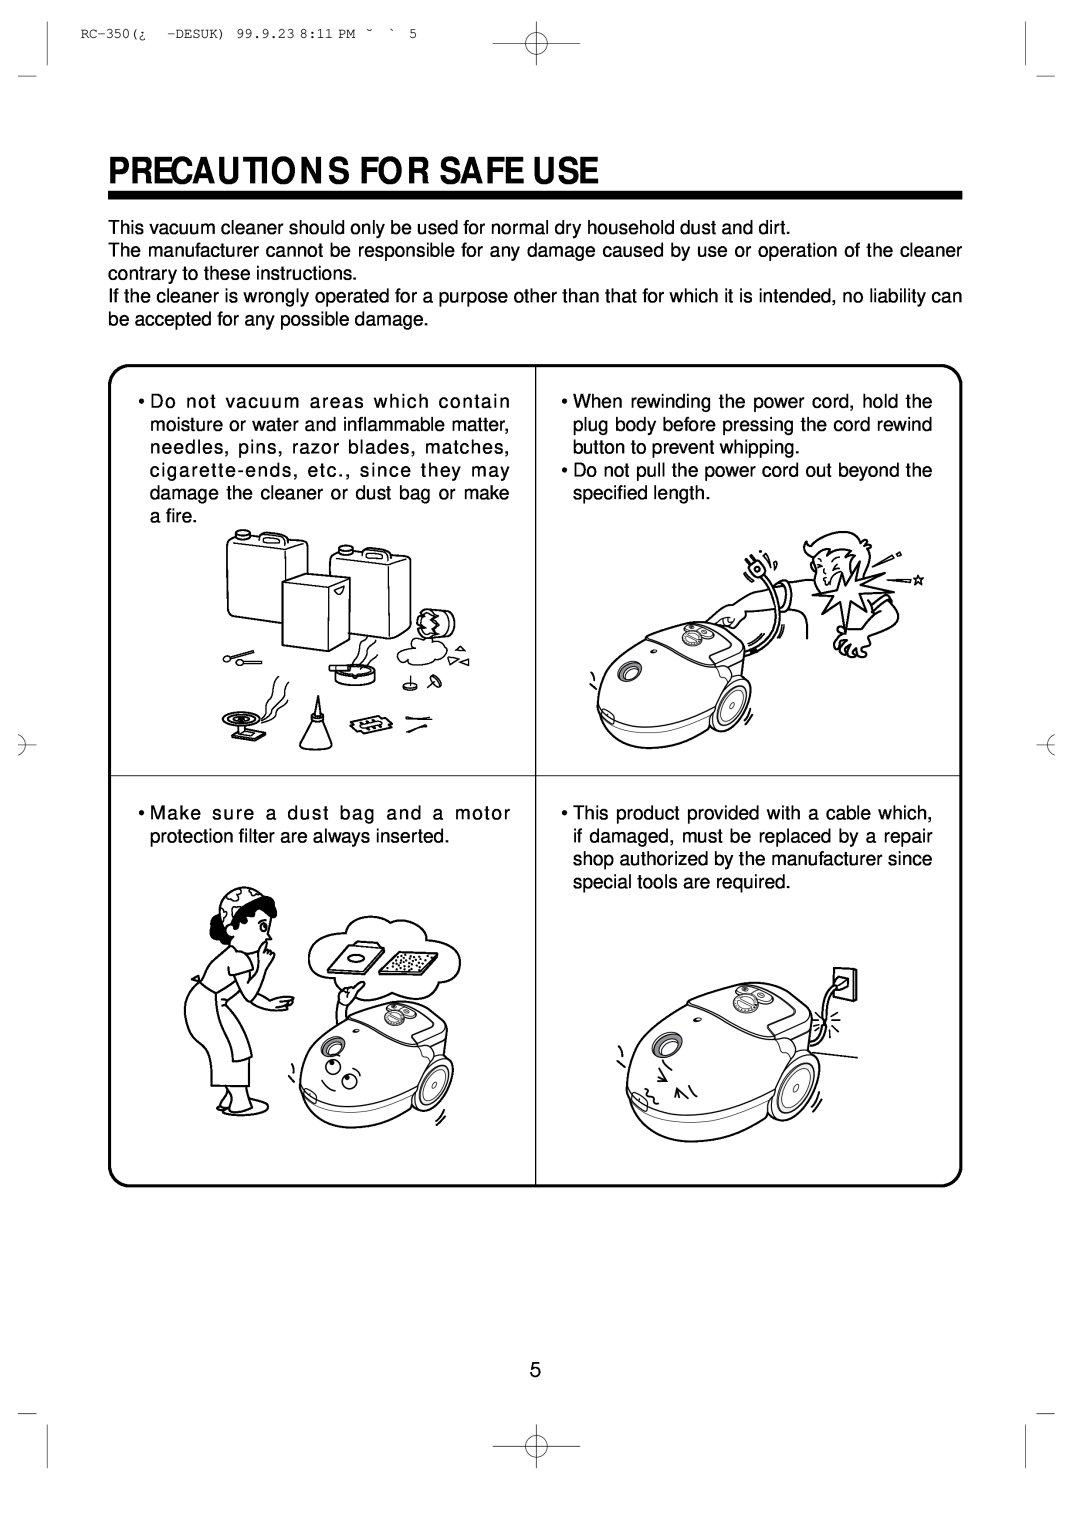 Daewoo RC-350 owner manual Precautions For Safe Use 